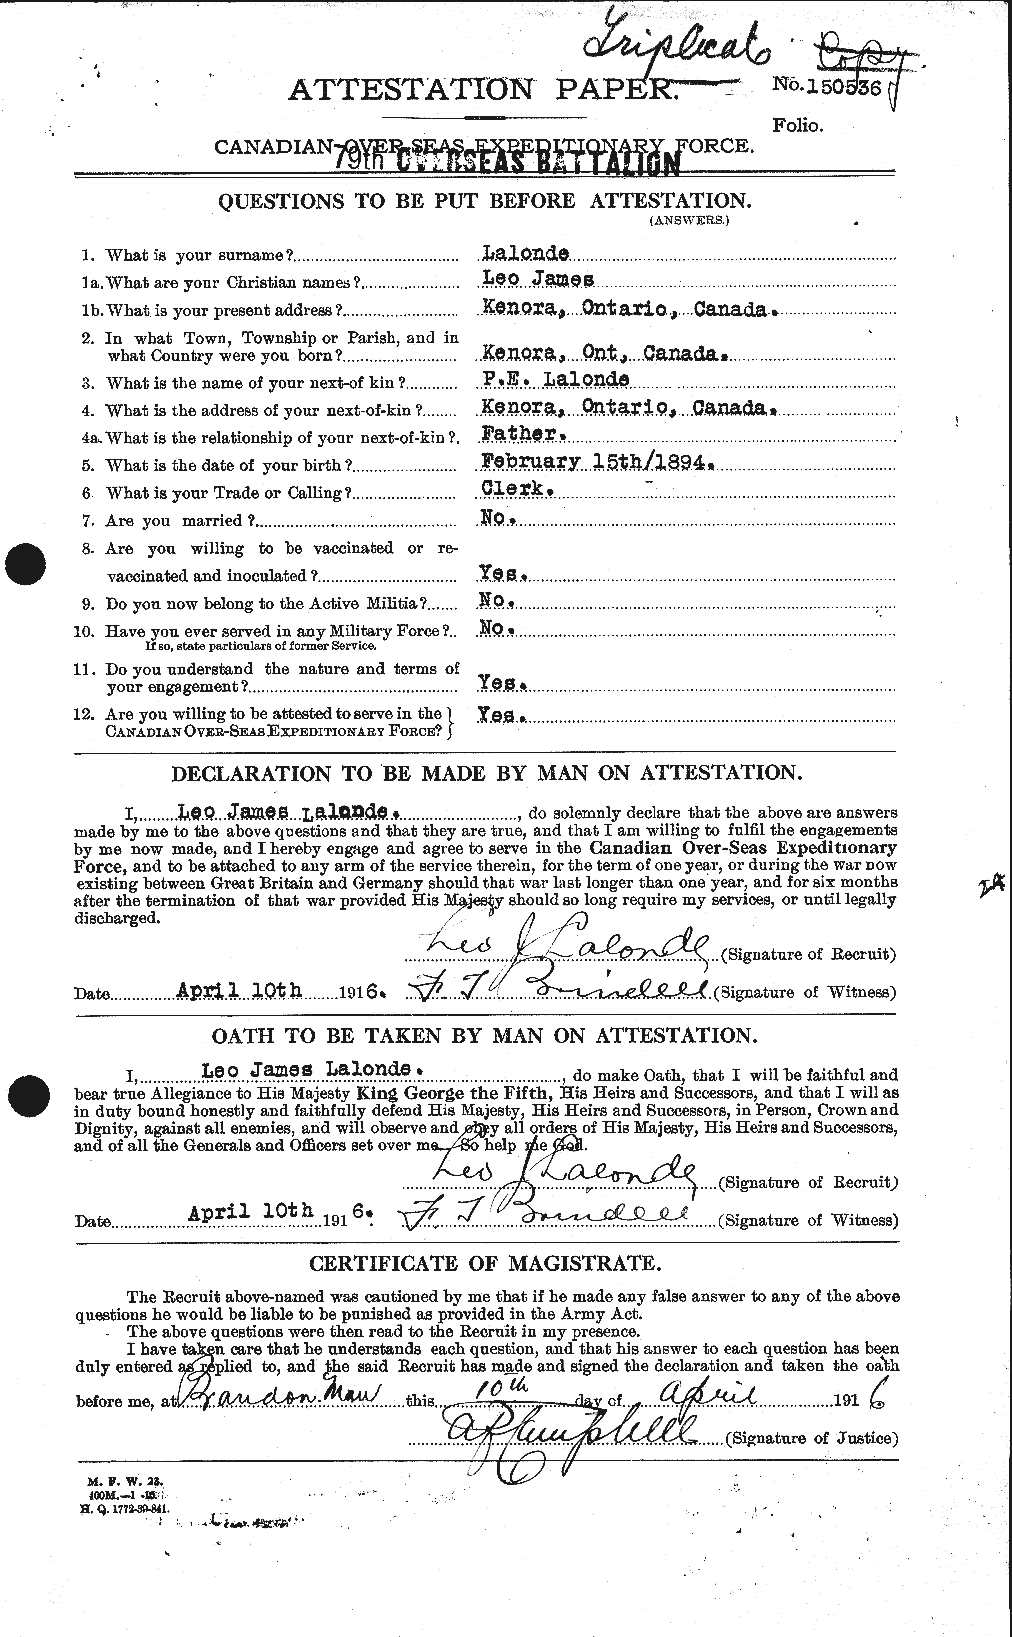 Personnel Records of the First World War - CEF 448464a